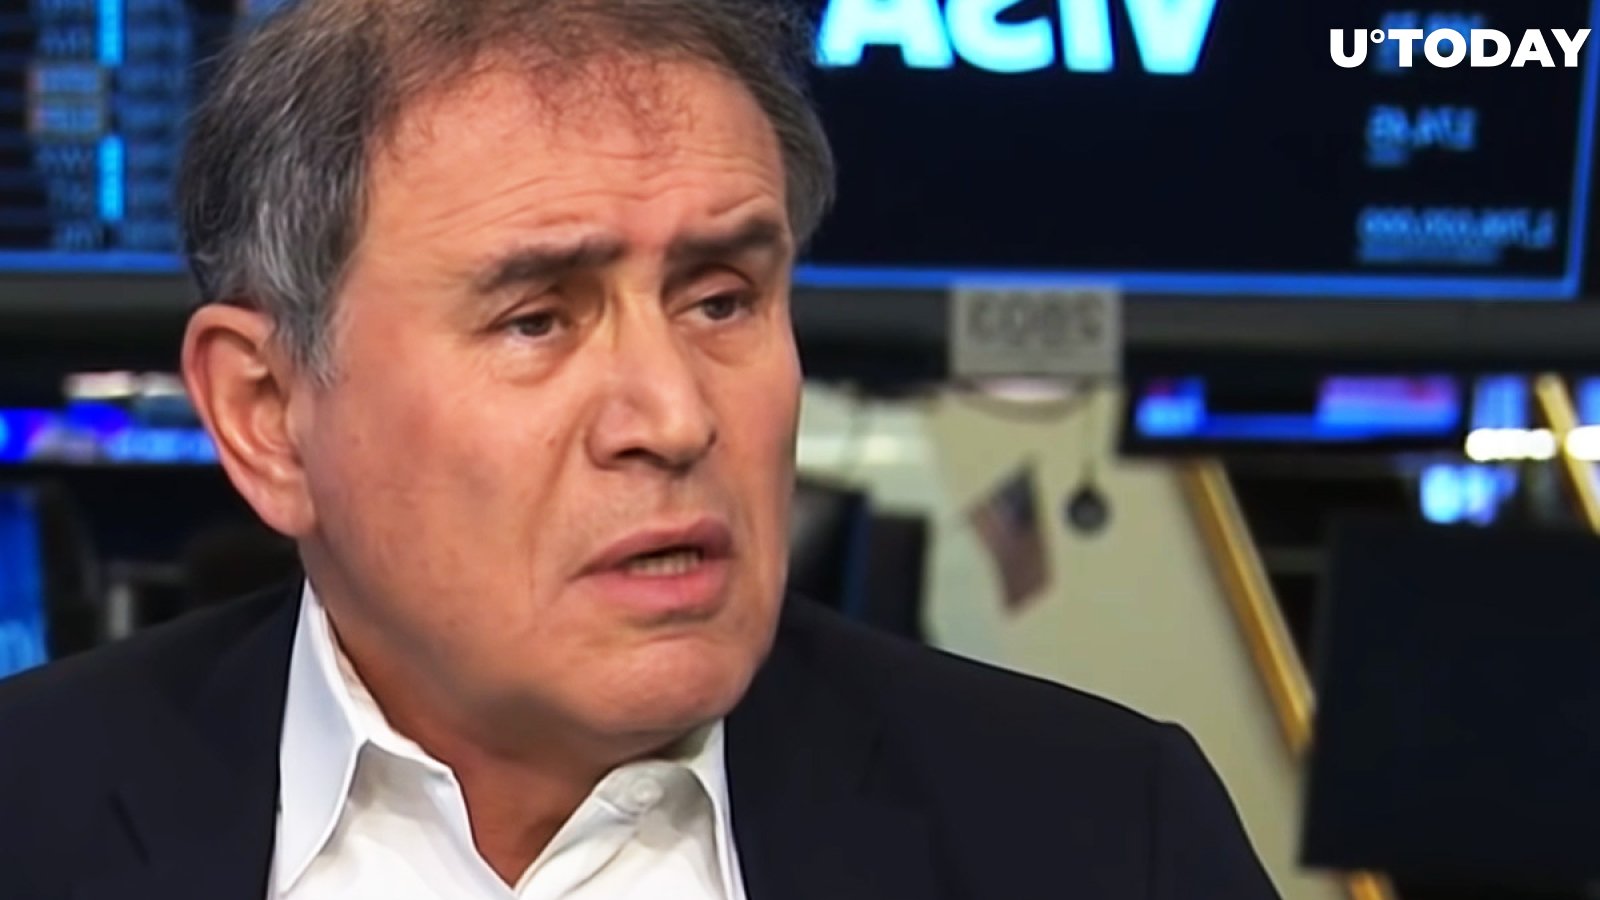 Dr. Doom Roubini Says Bitcoin Should Drop Much Lower, Wonders If Tether Will Push BTC Up As It Was Before